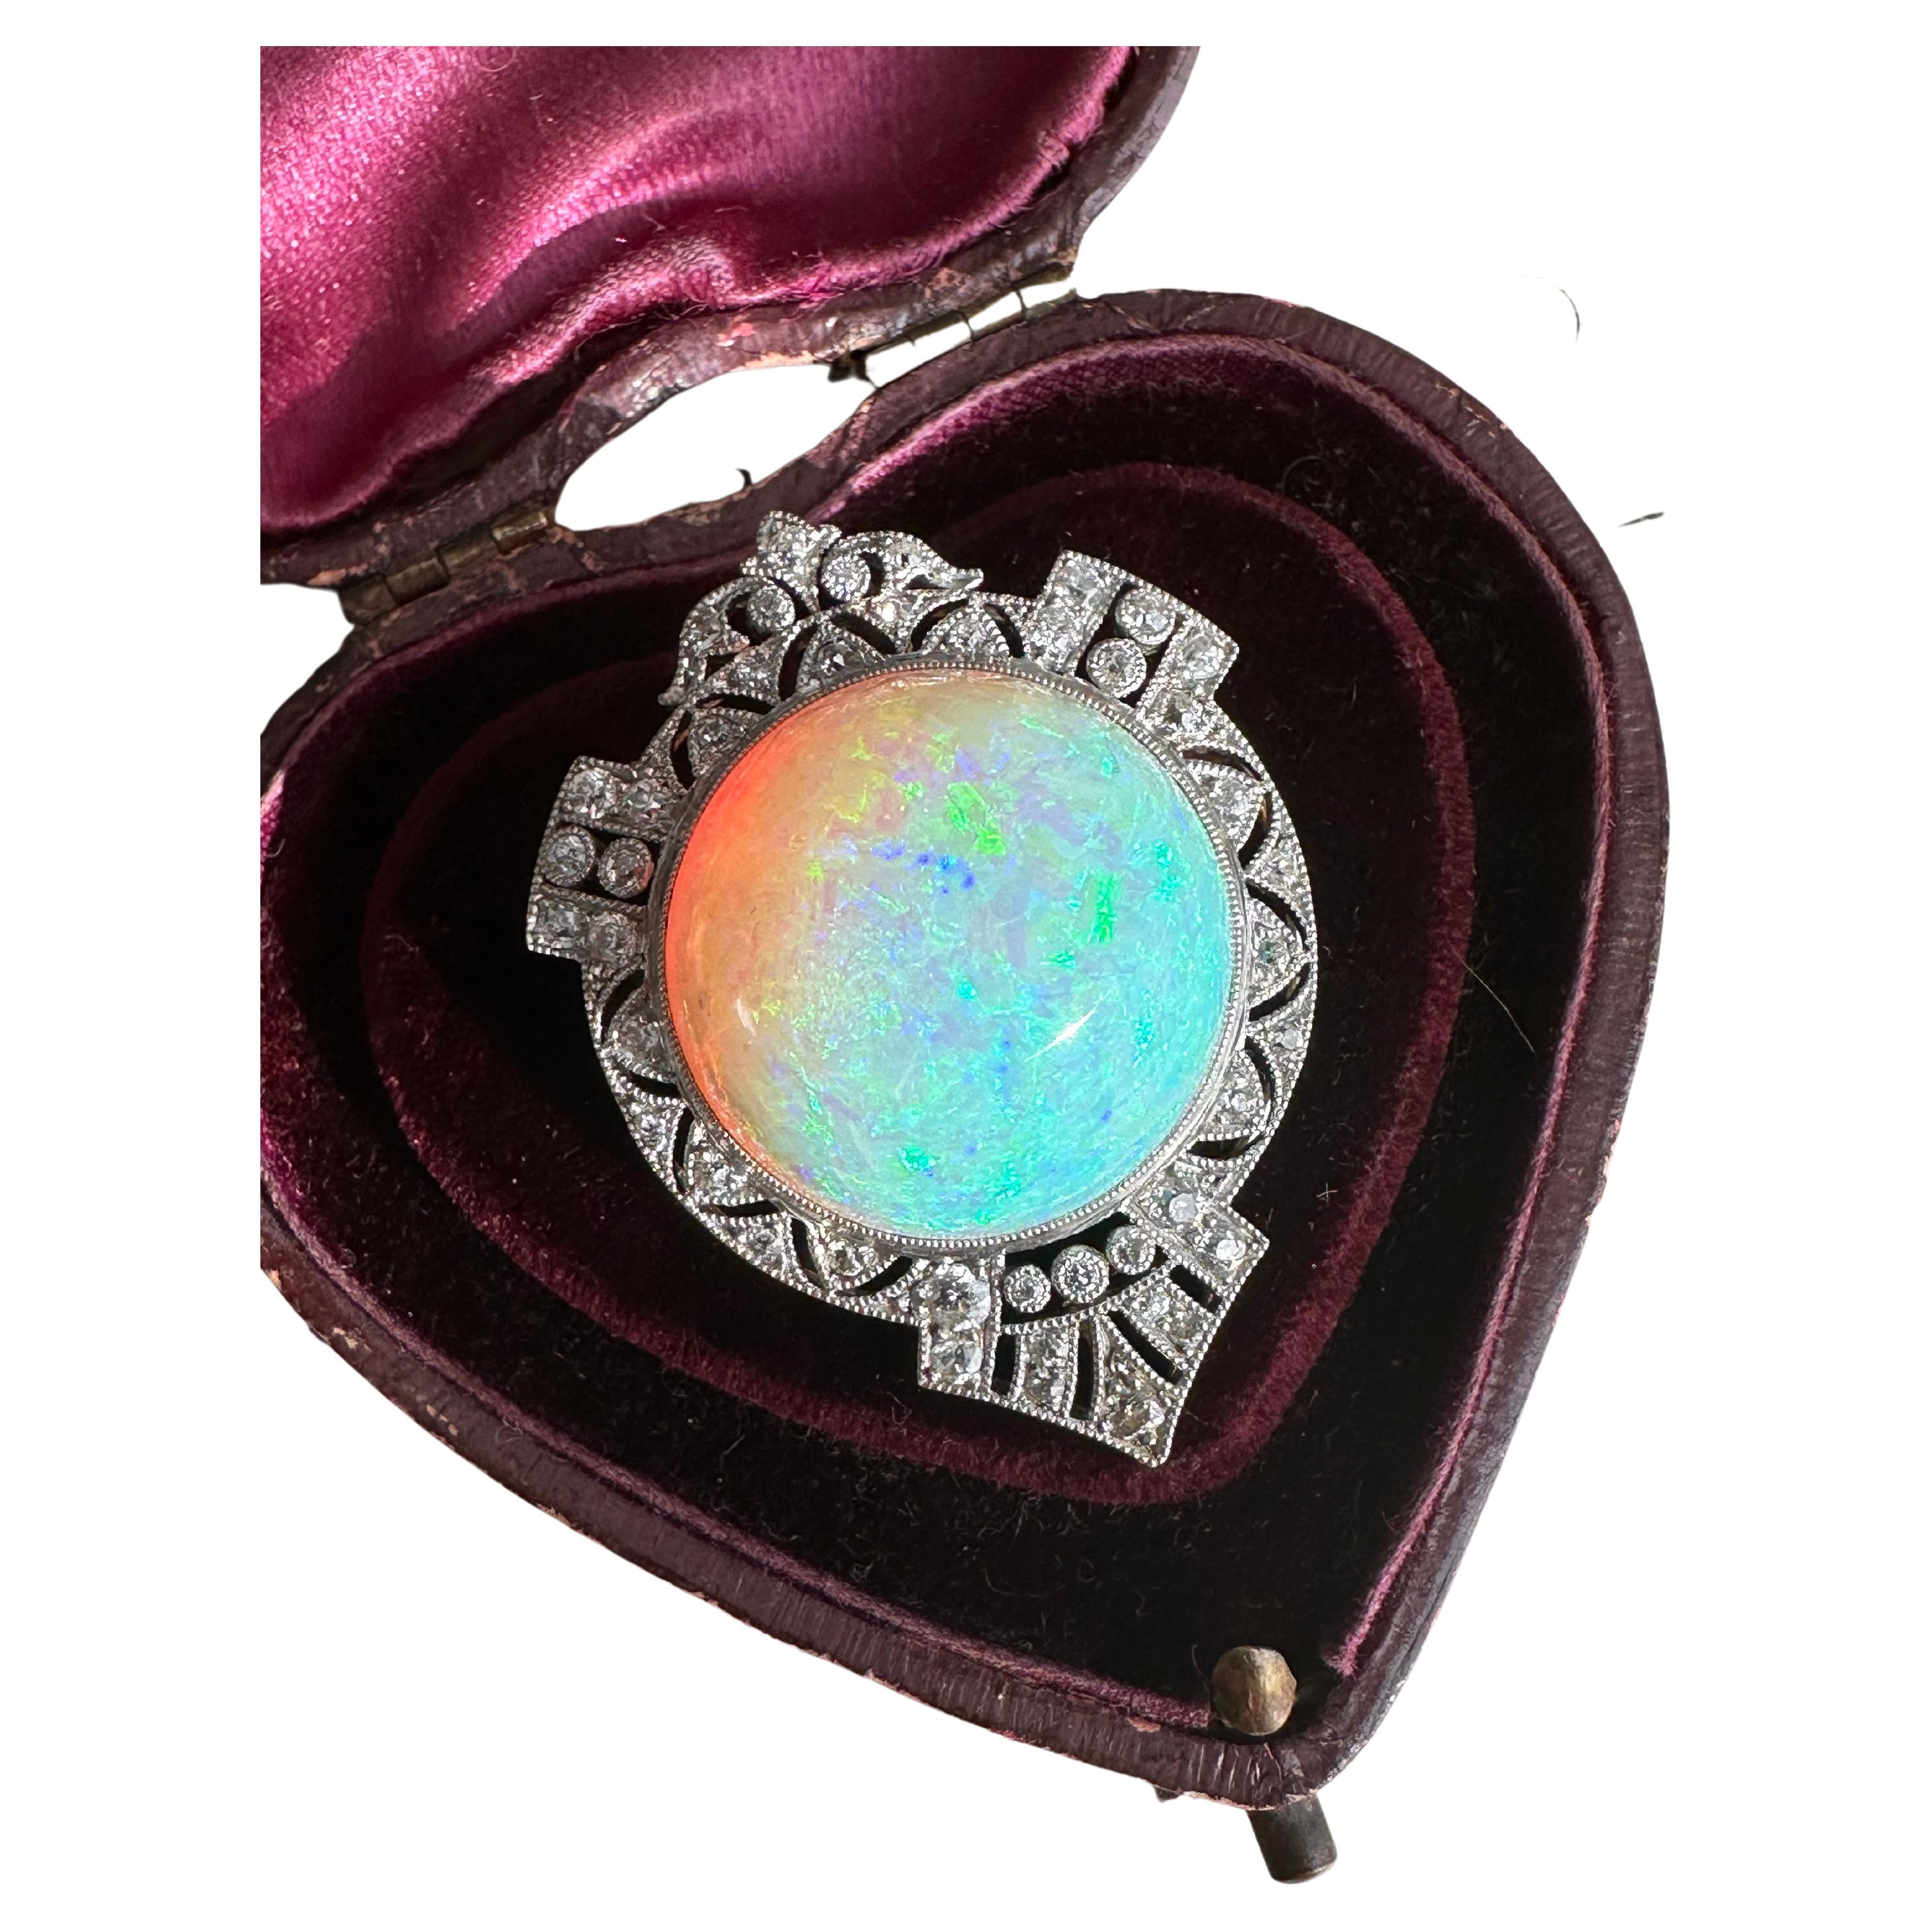 Late Edwardian Black, Starr and Frost Opal and Diamond Brooch